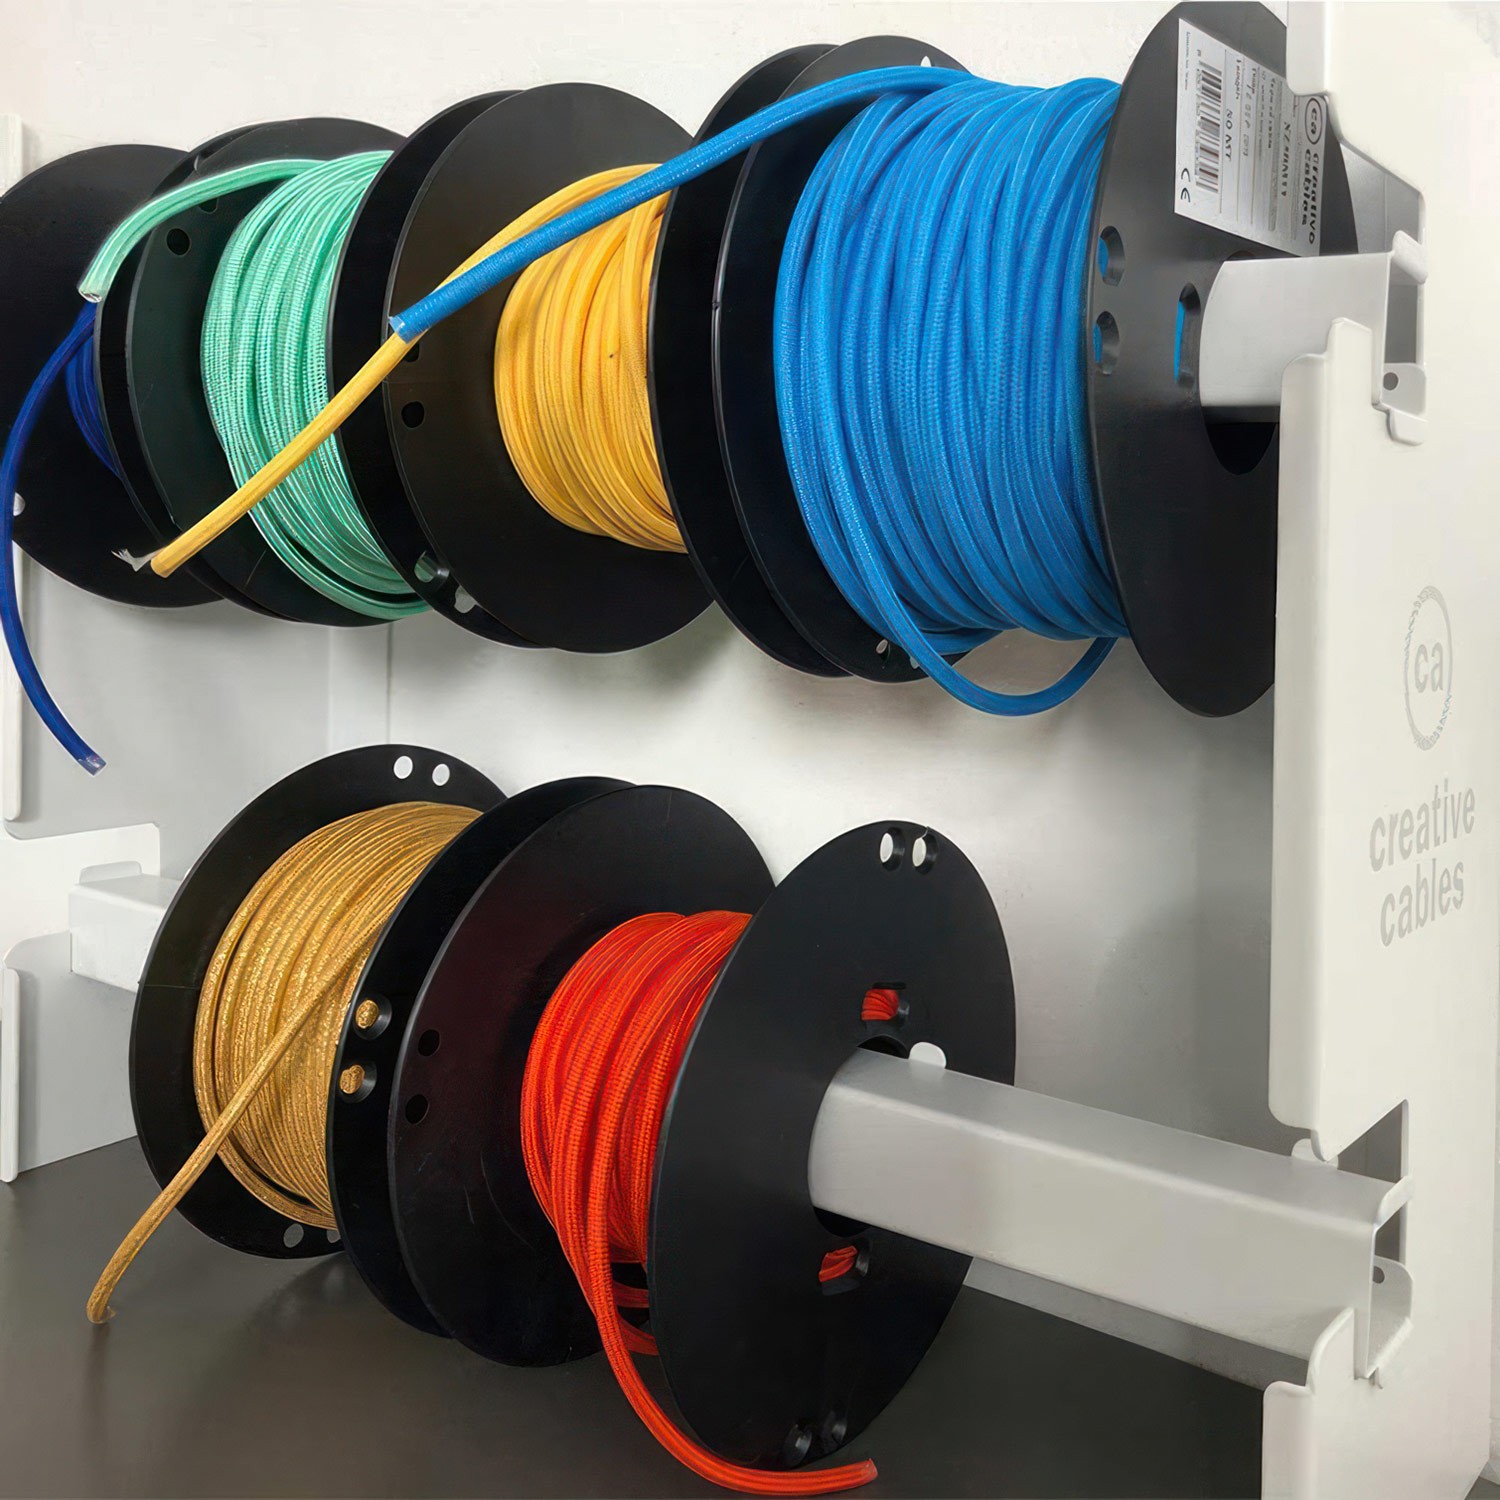 Display kit with logo for 8 reels of cable